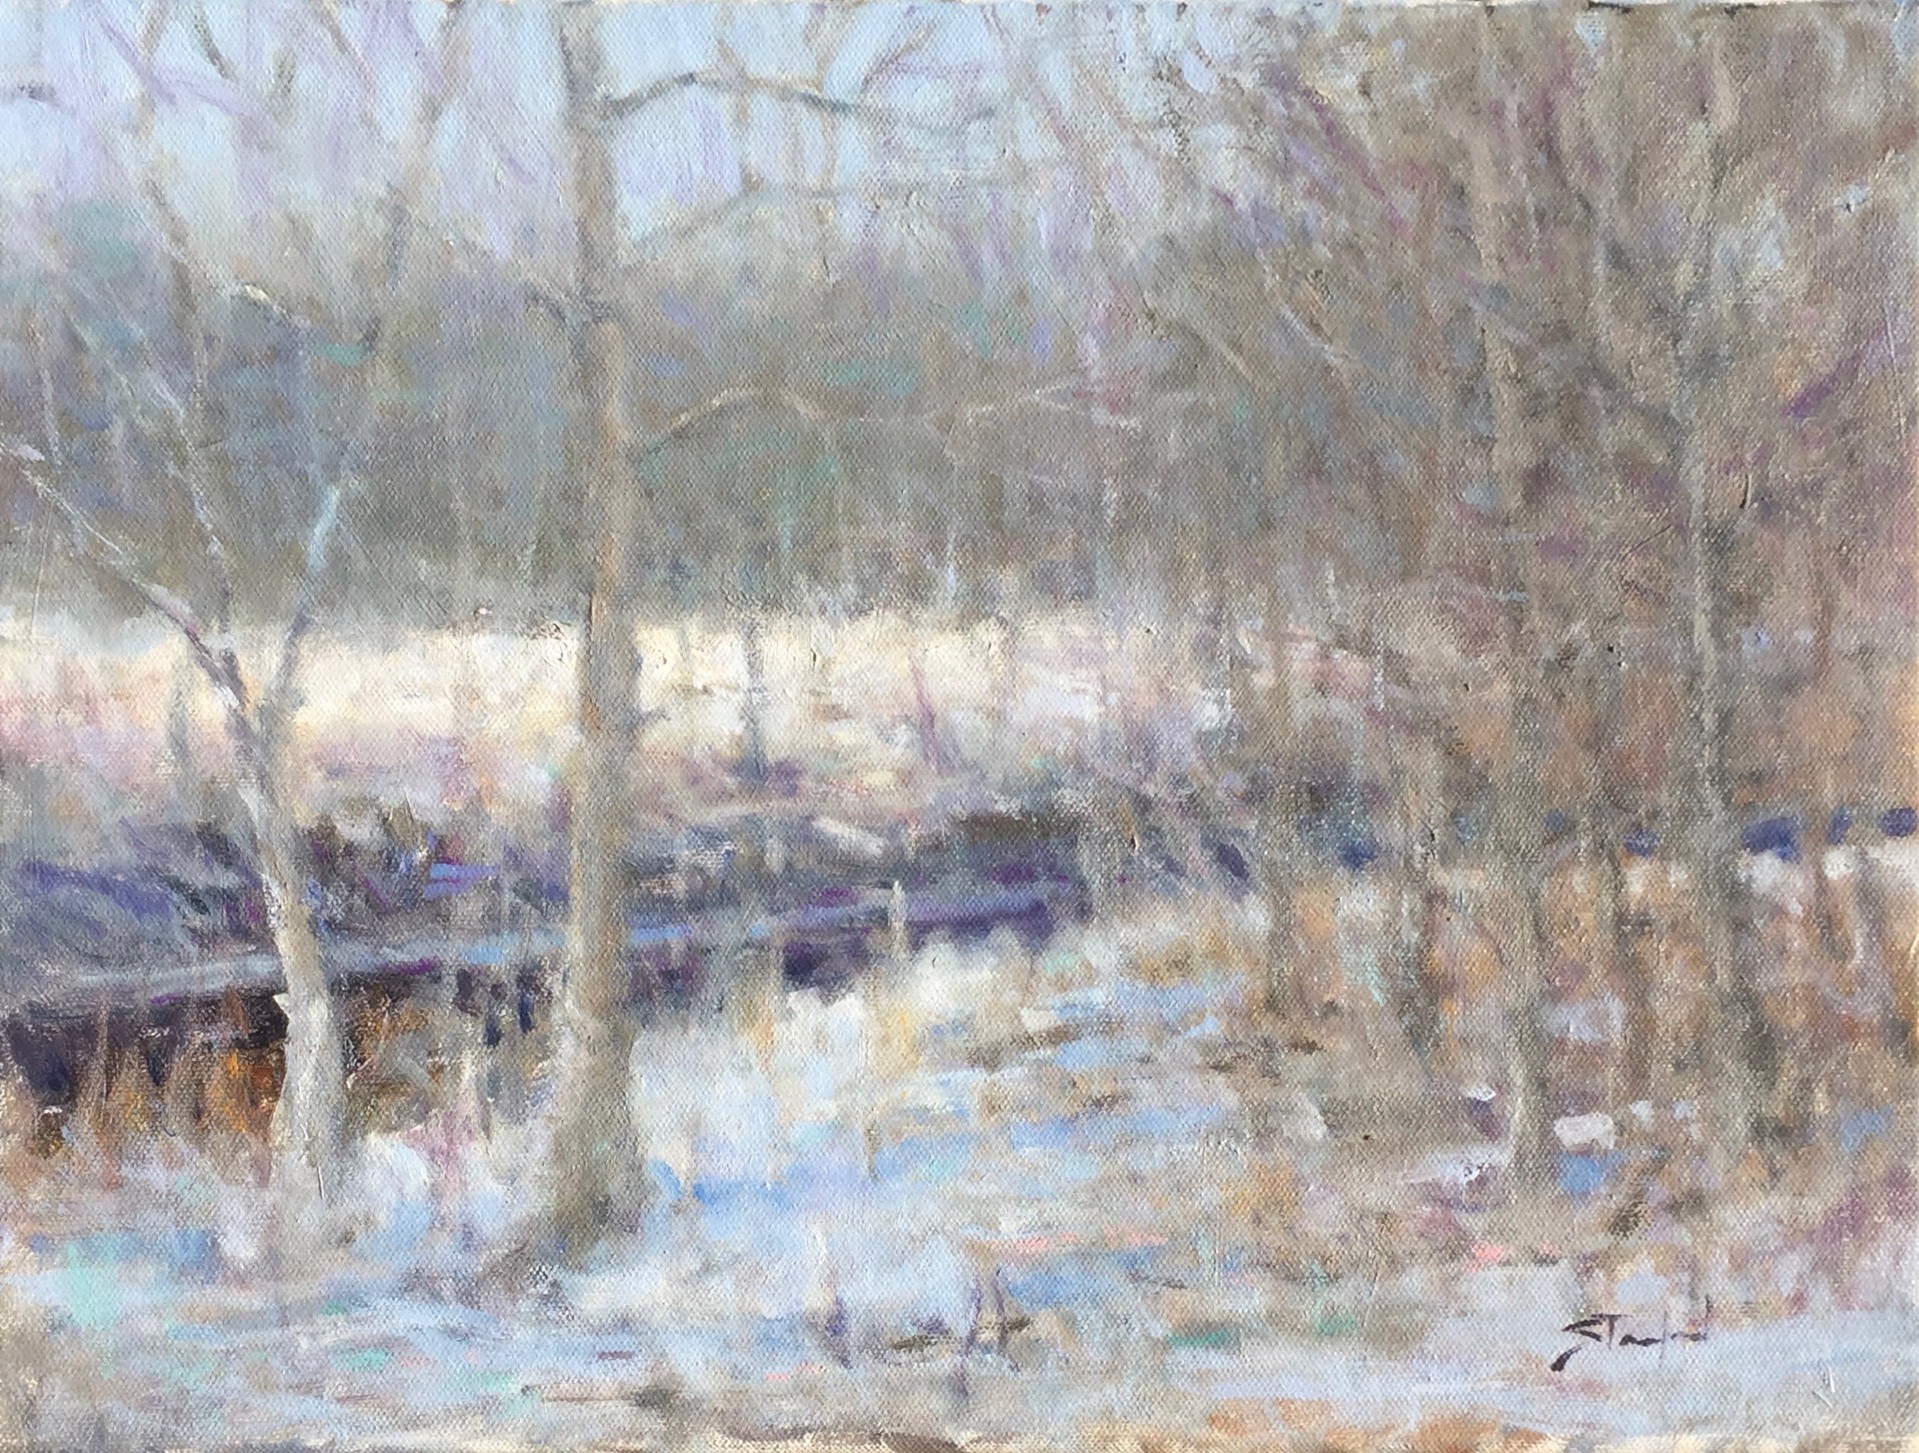 Snow in North Georgia by John Stanford